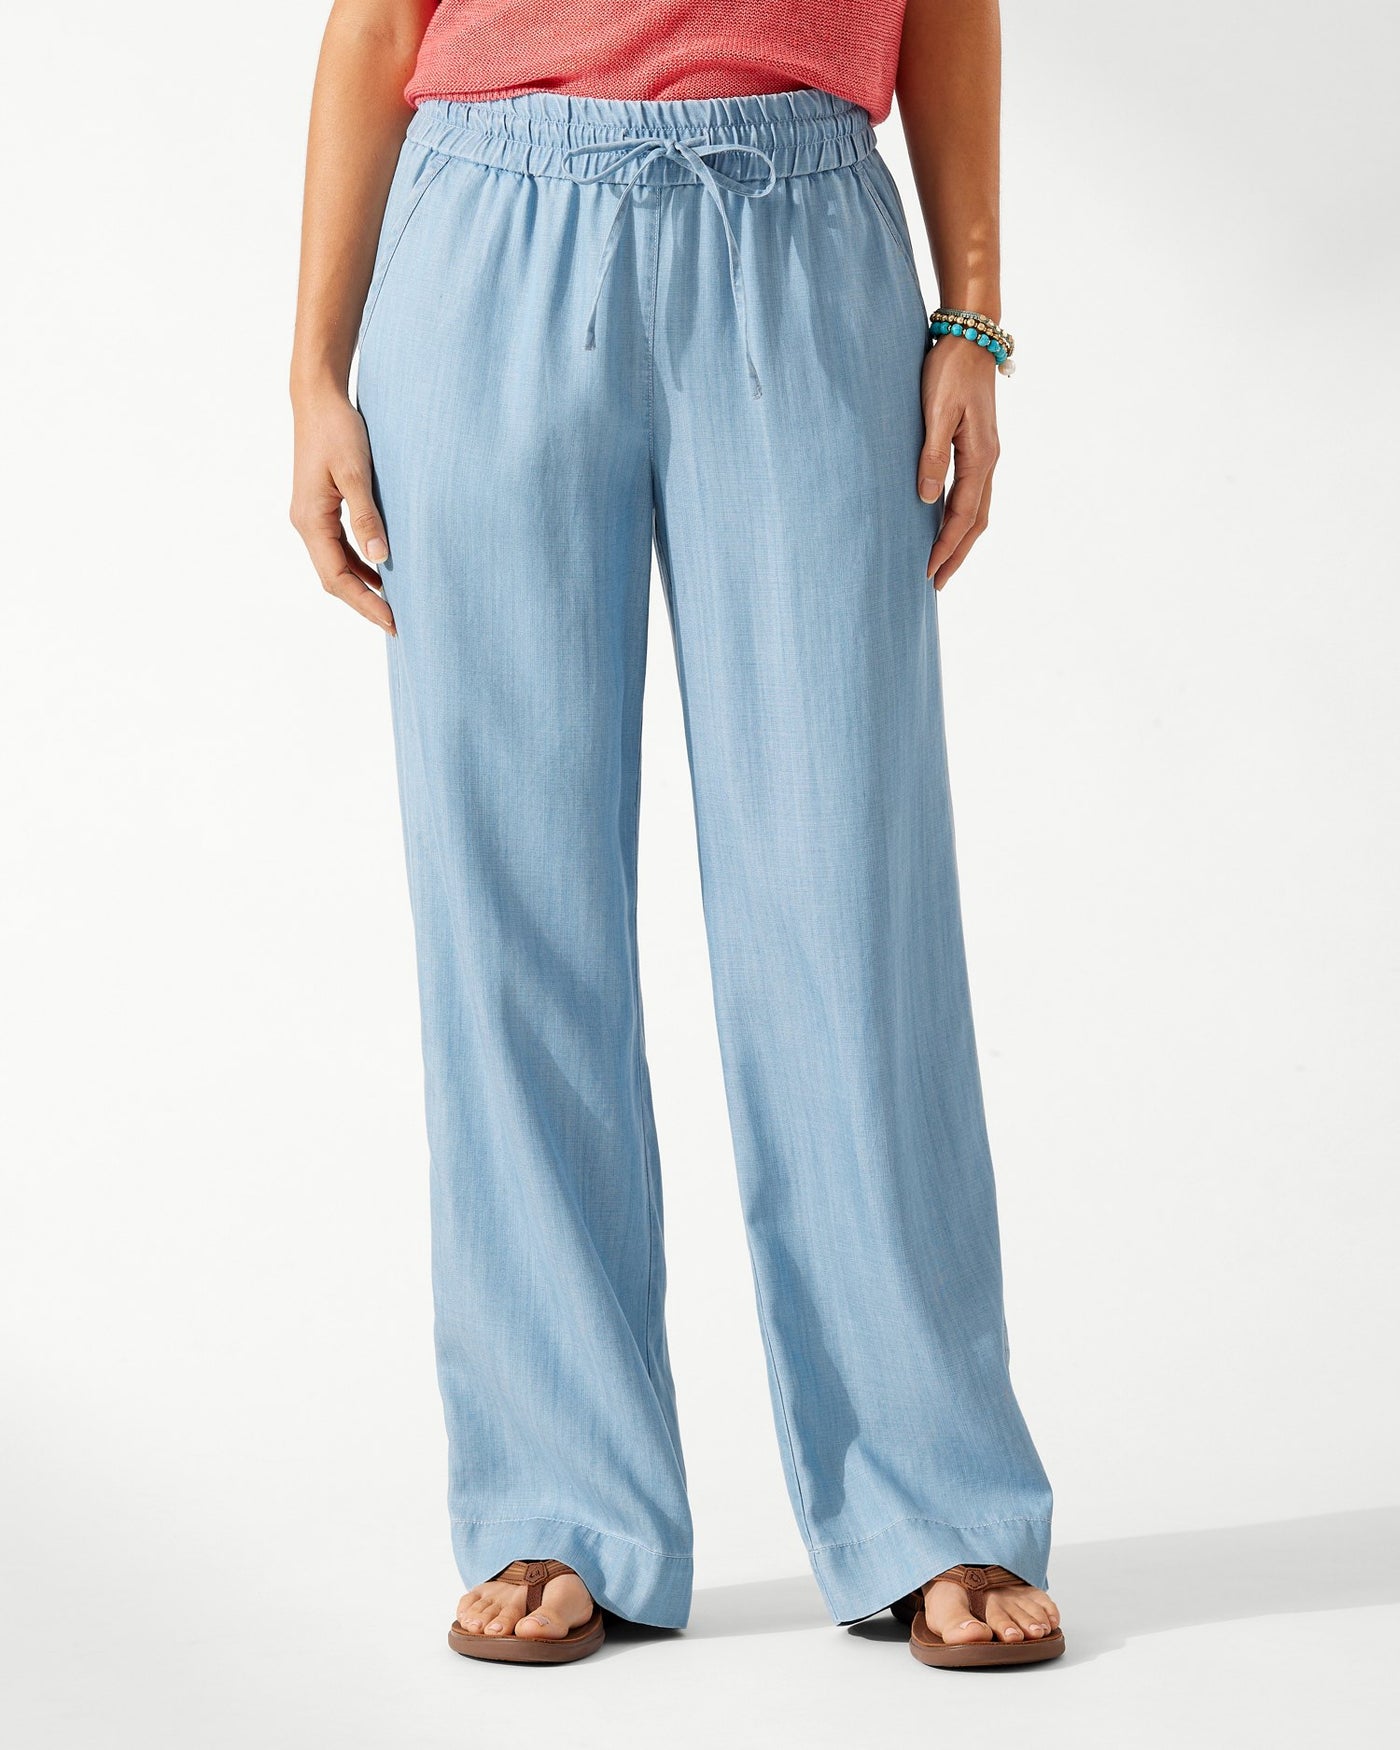 Chambray All Day Easy Pant